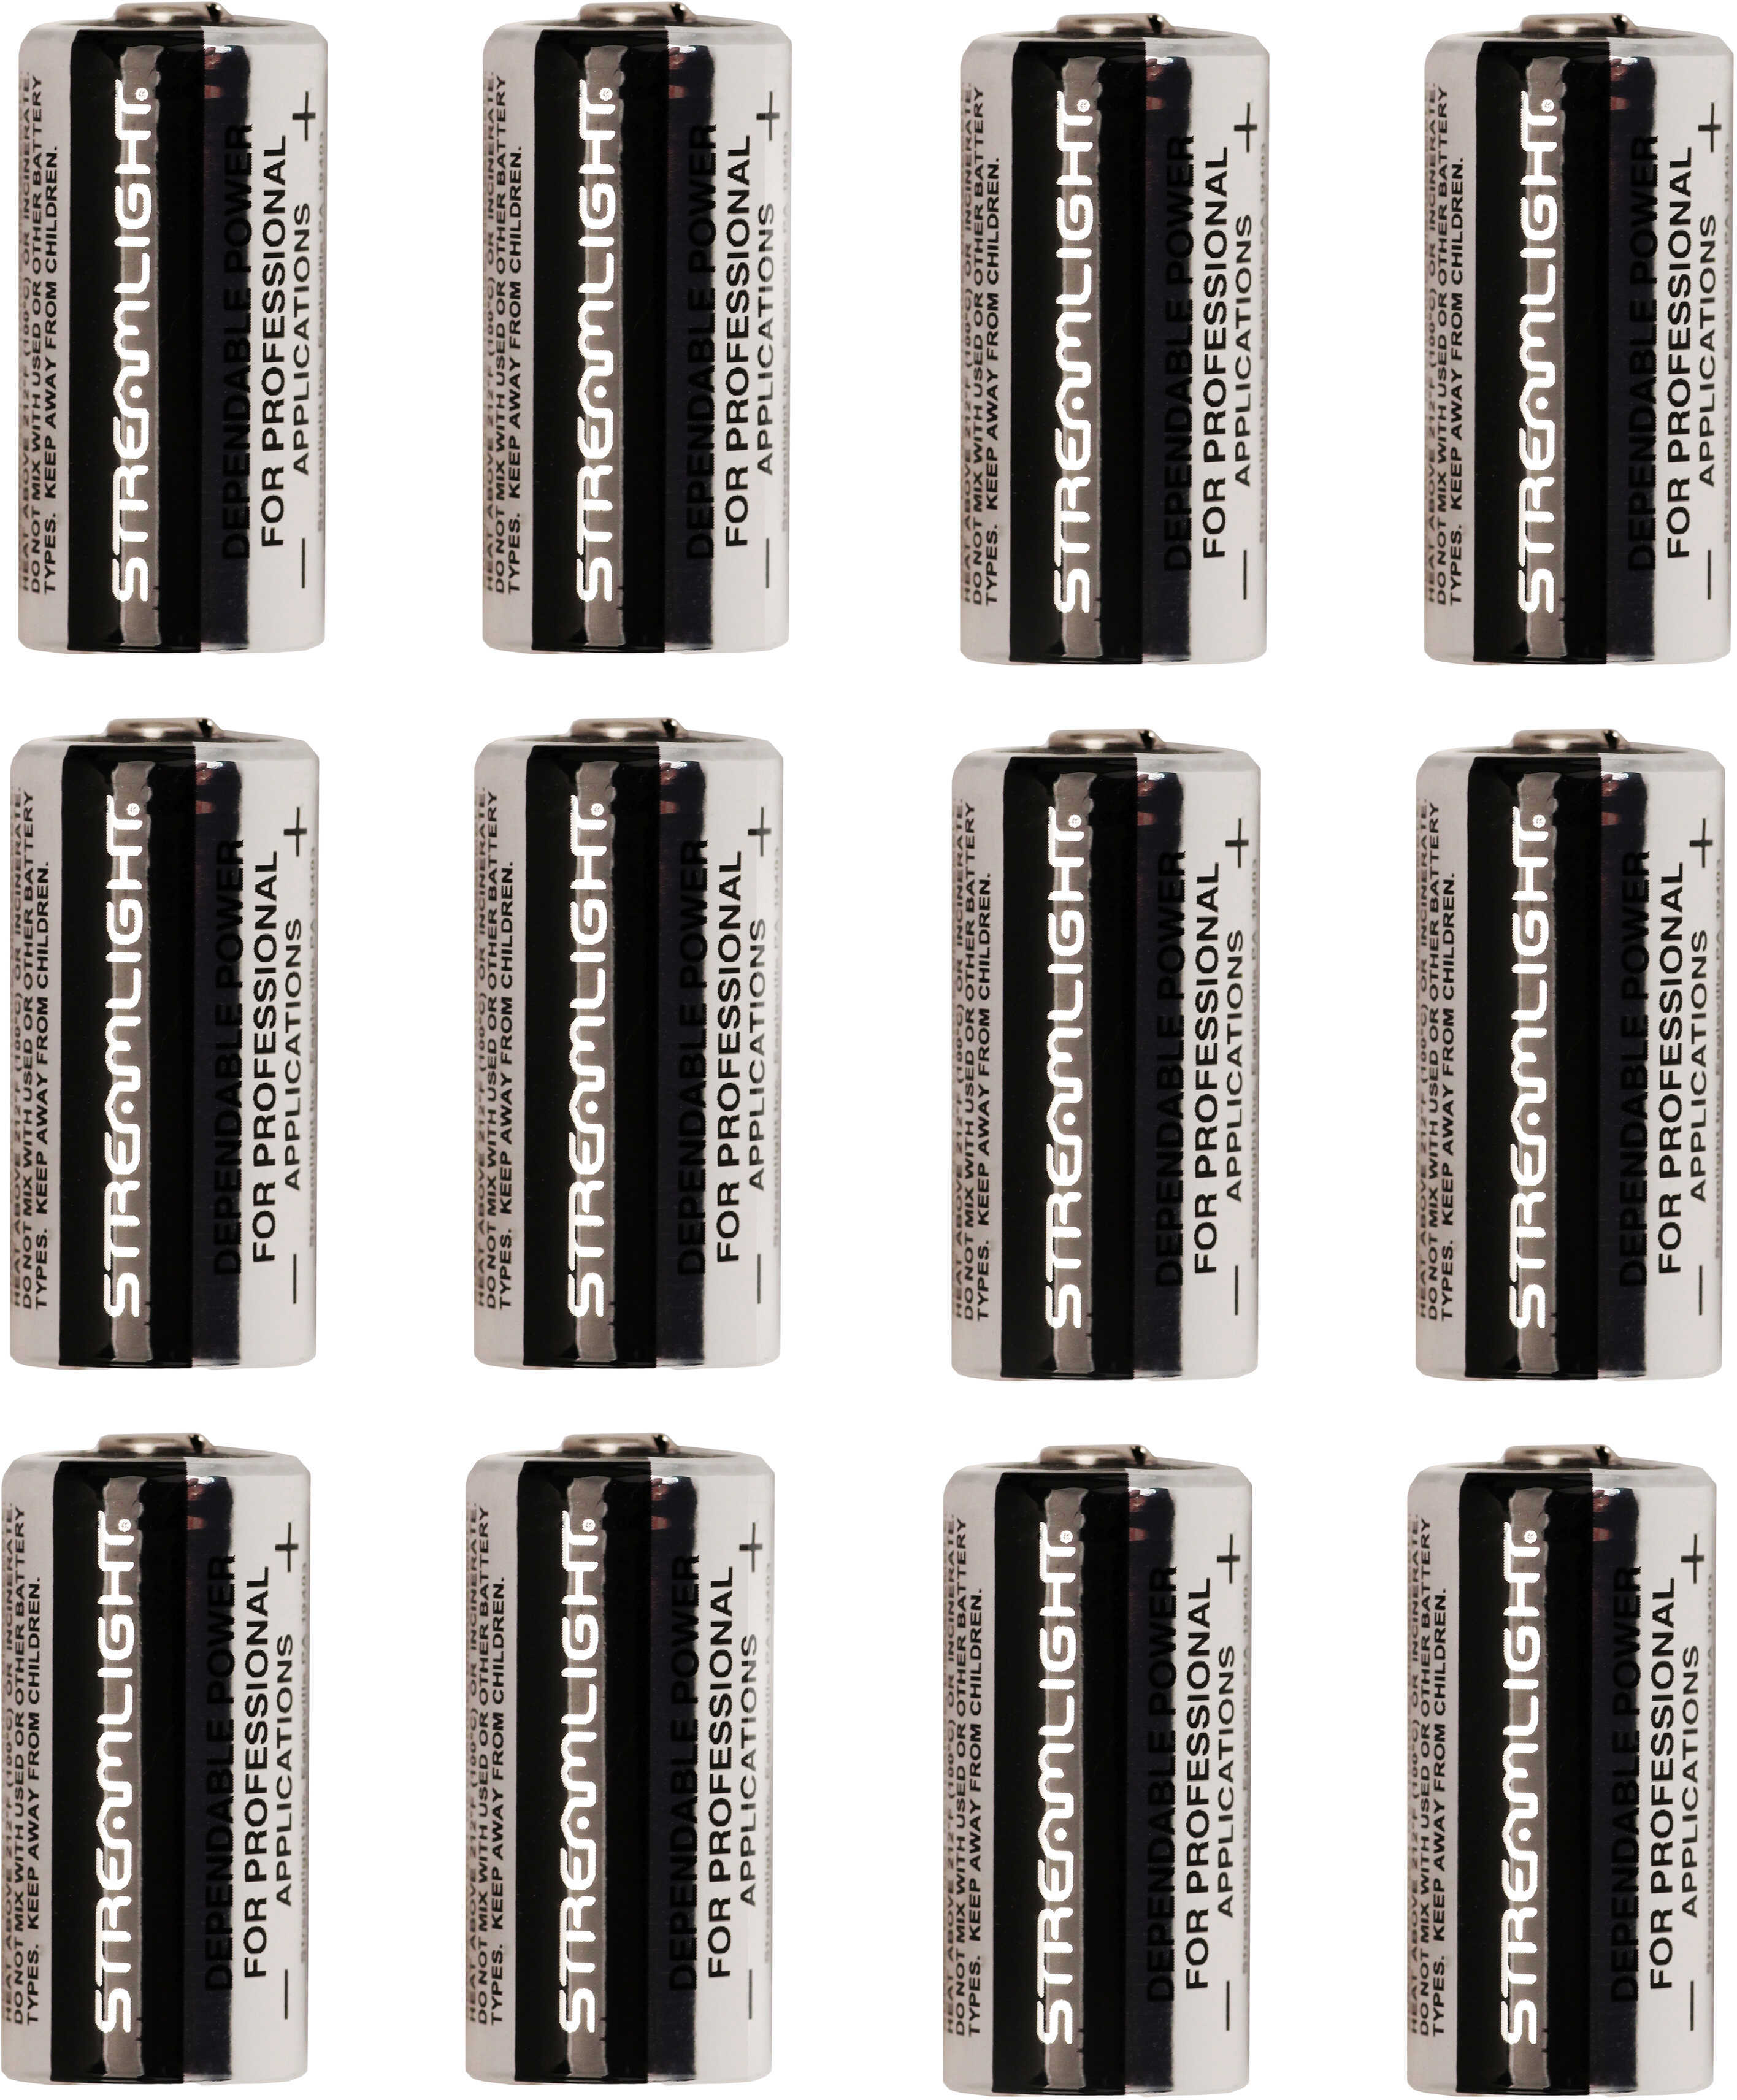 Streamlight Lithium Batteries CR123A 12 Pack Model: 85177